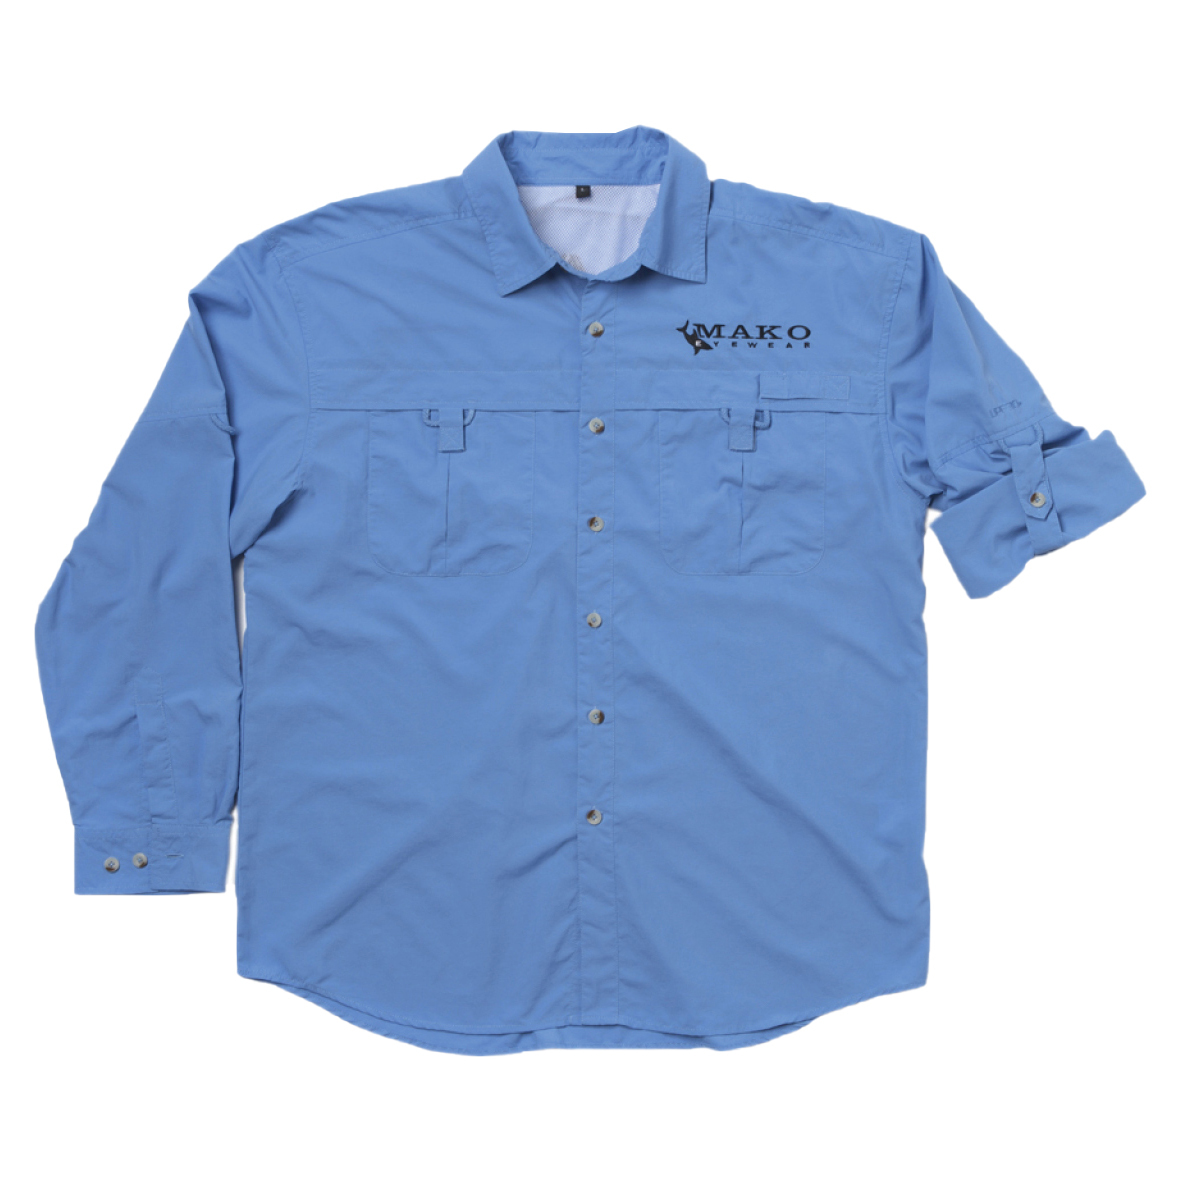 Mako M600 Shirt Available In A Variety Of Sizes